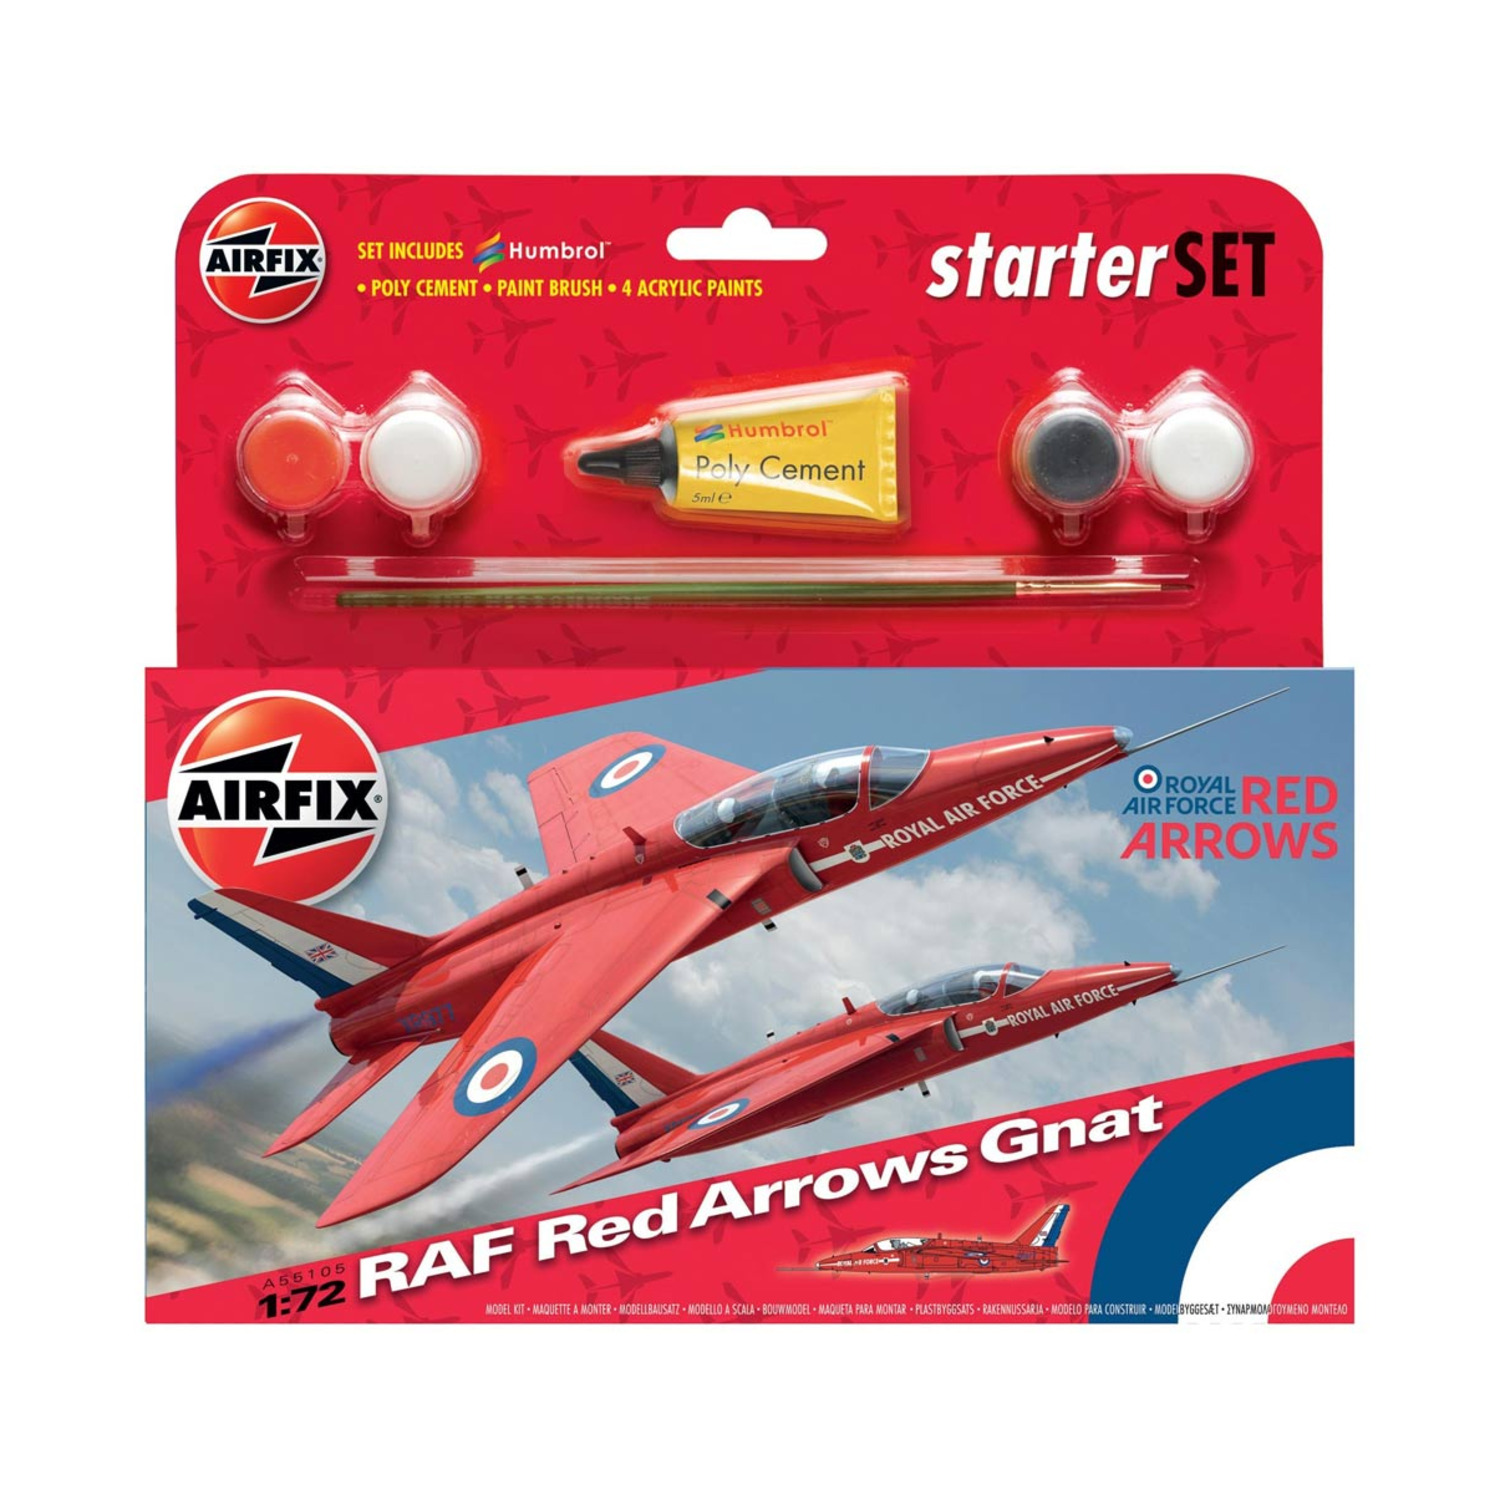 RAF Red Arrows Gnat - Small Starter Set New - image 1 of 3